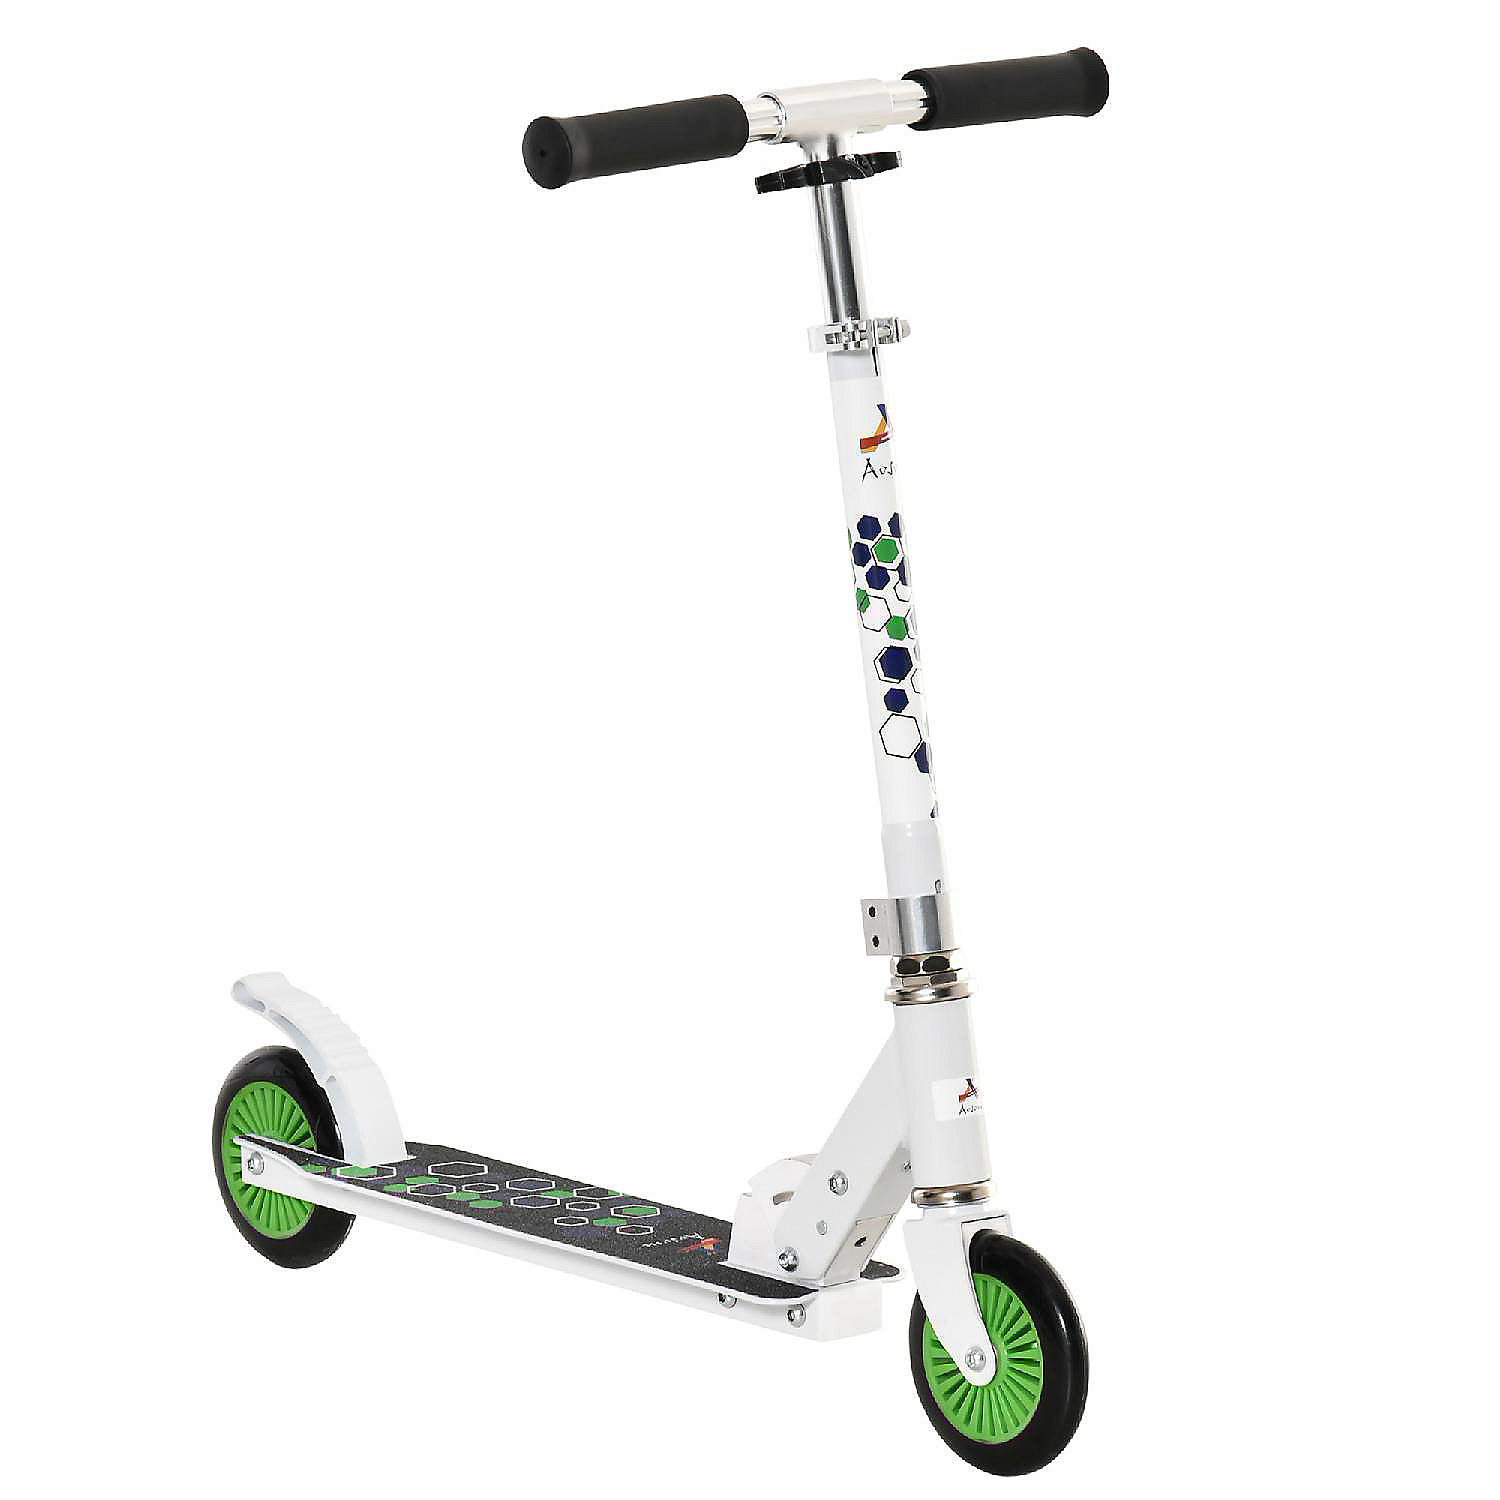 Kids Scooter 2 Wheeled Folding Kick Scooter with Adjustable Handlebar Rear Brake for Boys Girls Age 6 Years and Above 